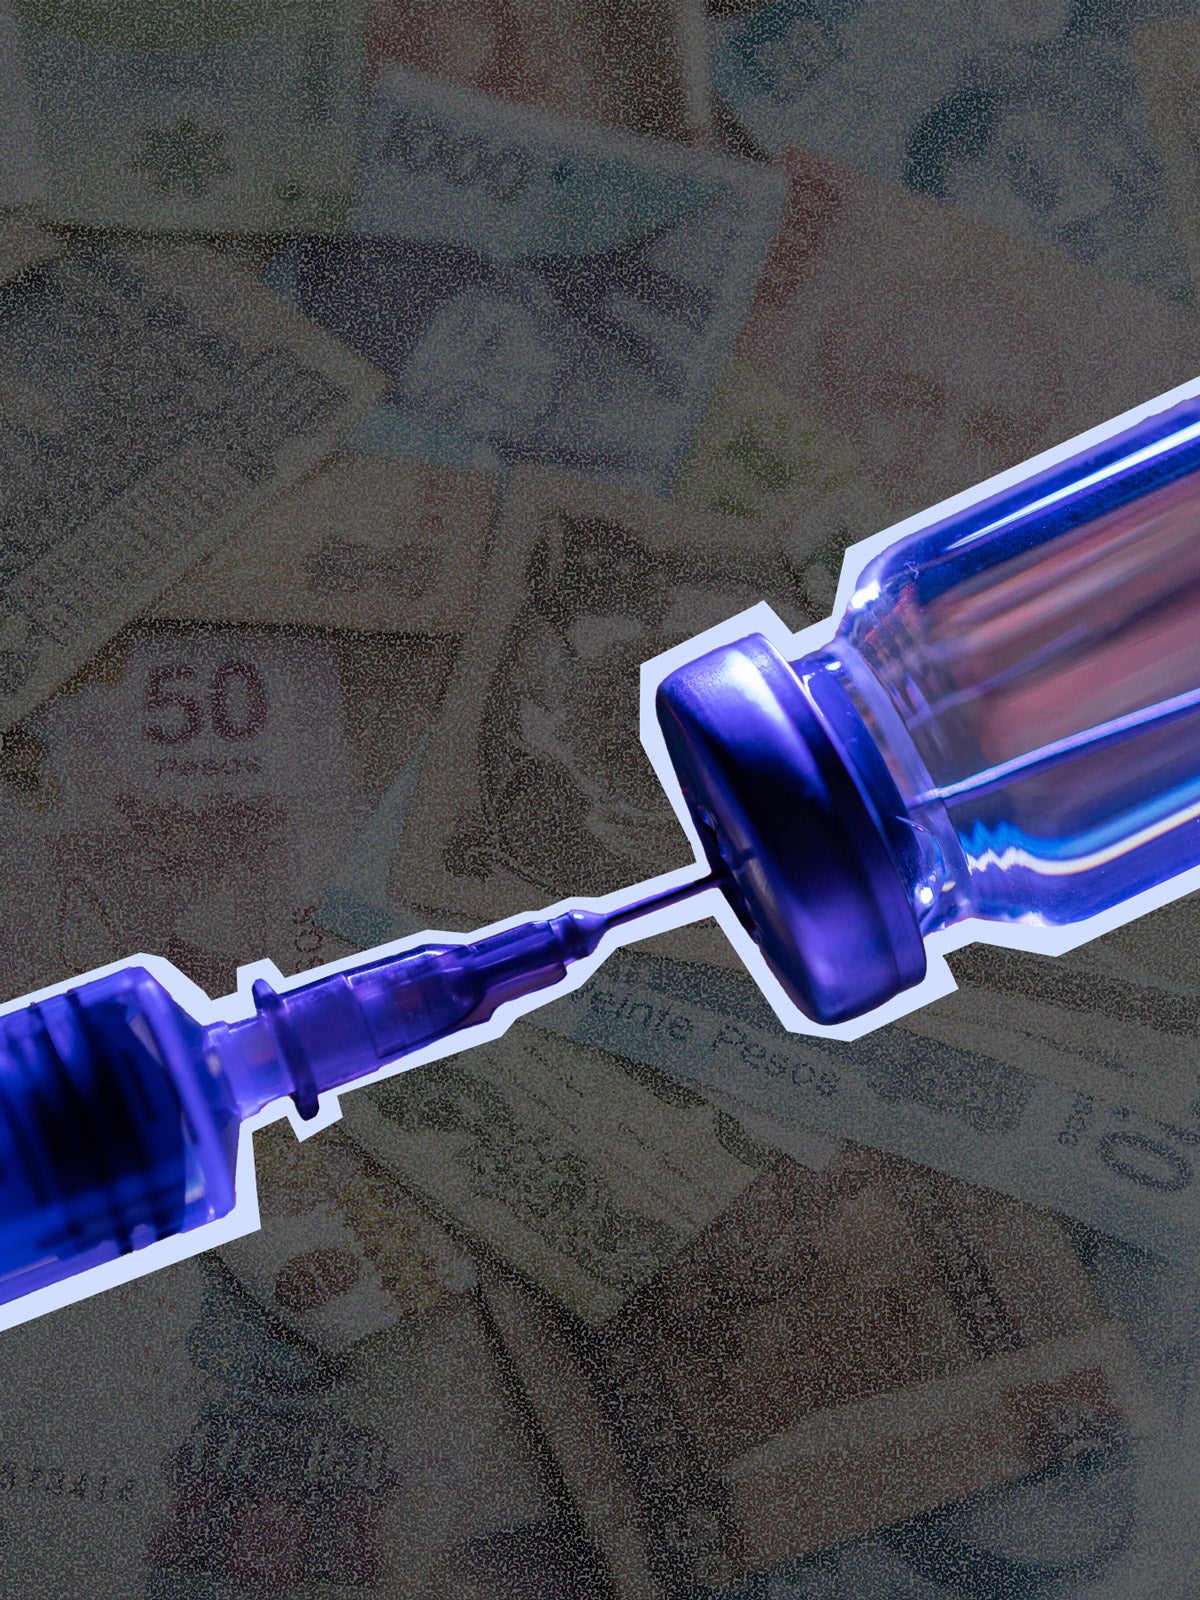 Photo illustration: A blue vaccine vial and syringe are overlaid on a grey-speckled background of paper currency from different countries.